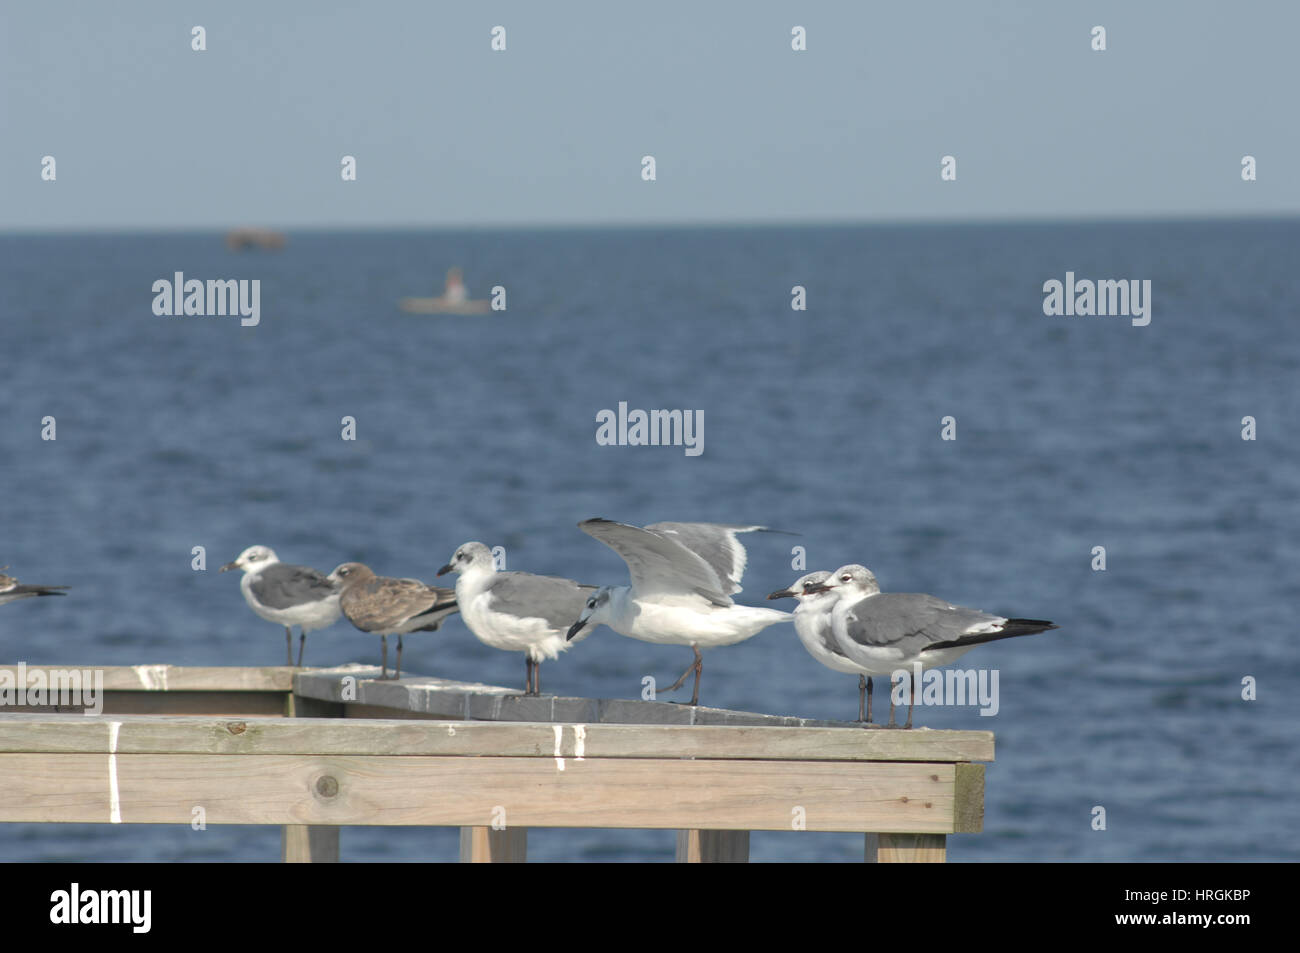 Seagulls facing into the wind on Pamlico Sound, Outer Banks, North Carolina Stock Photo